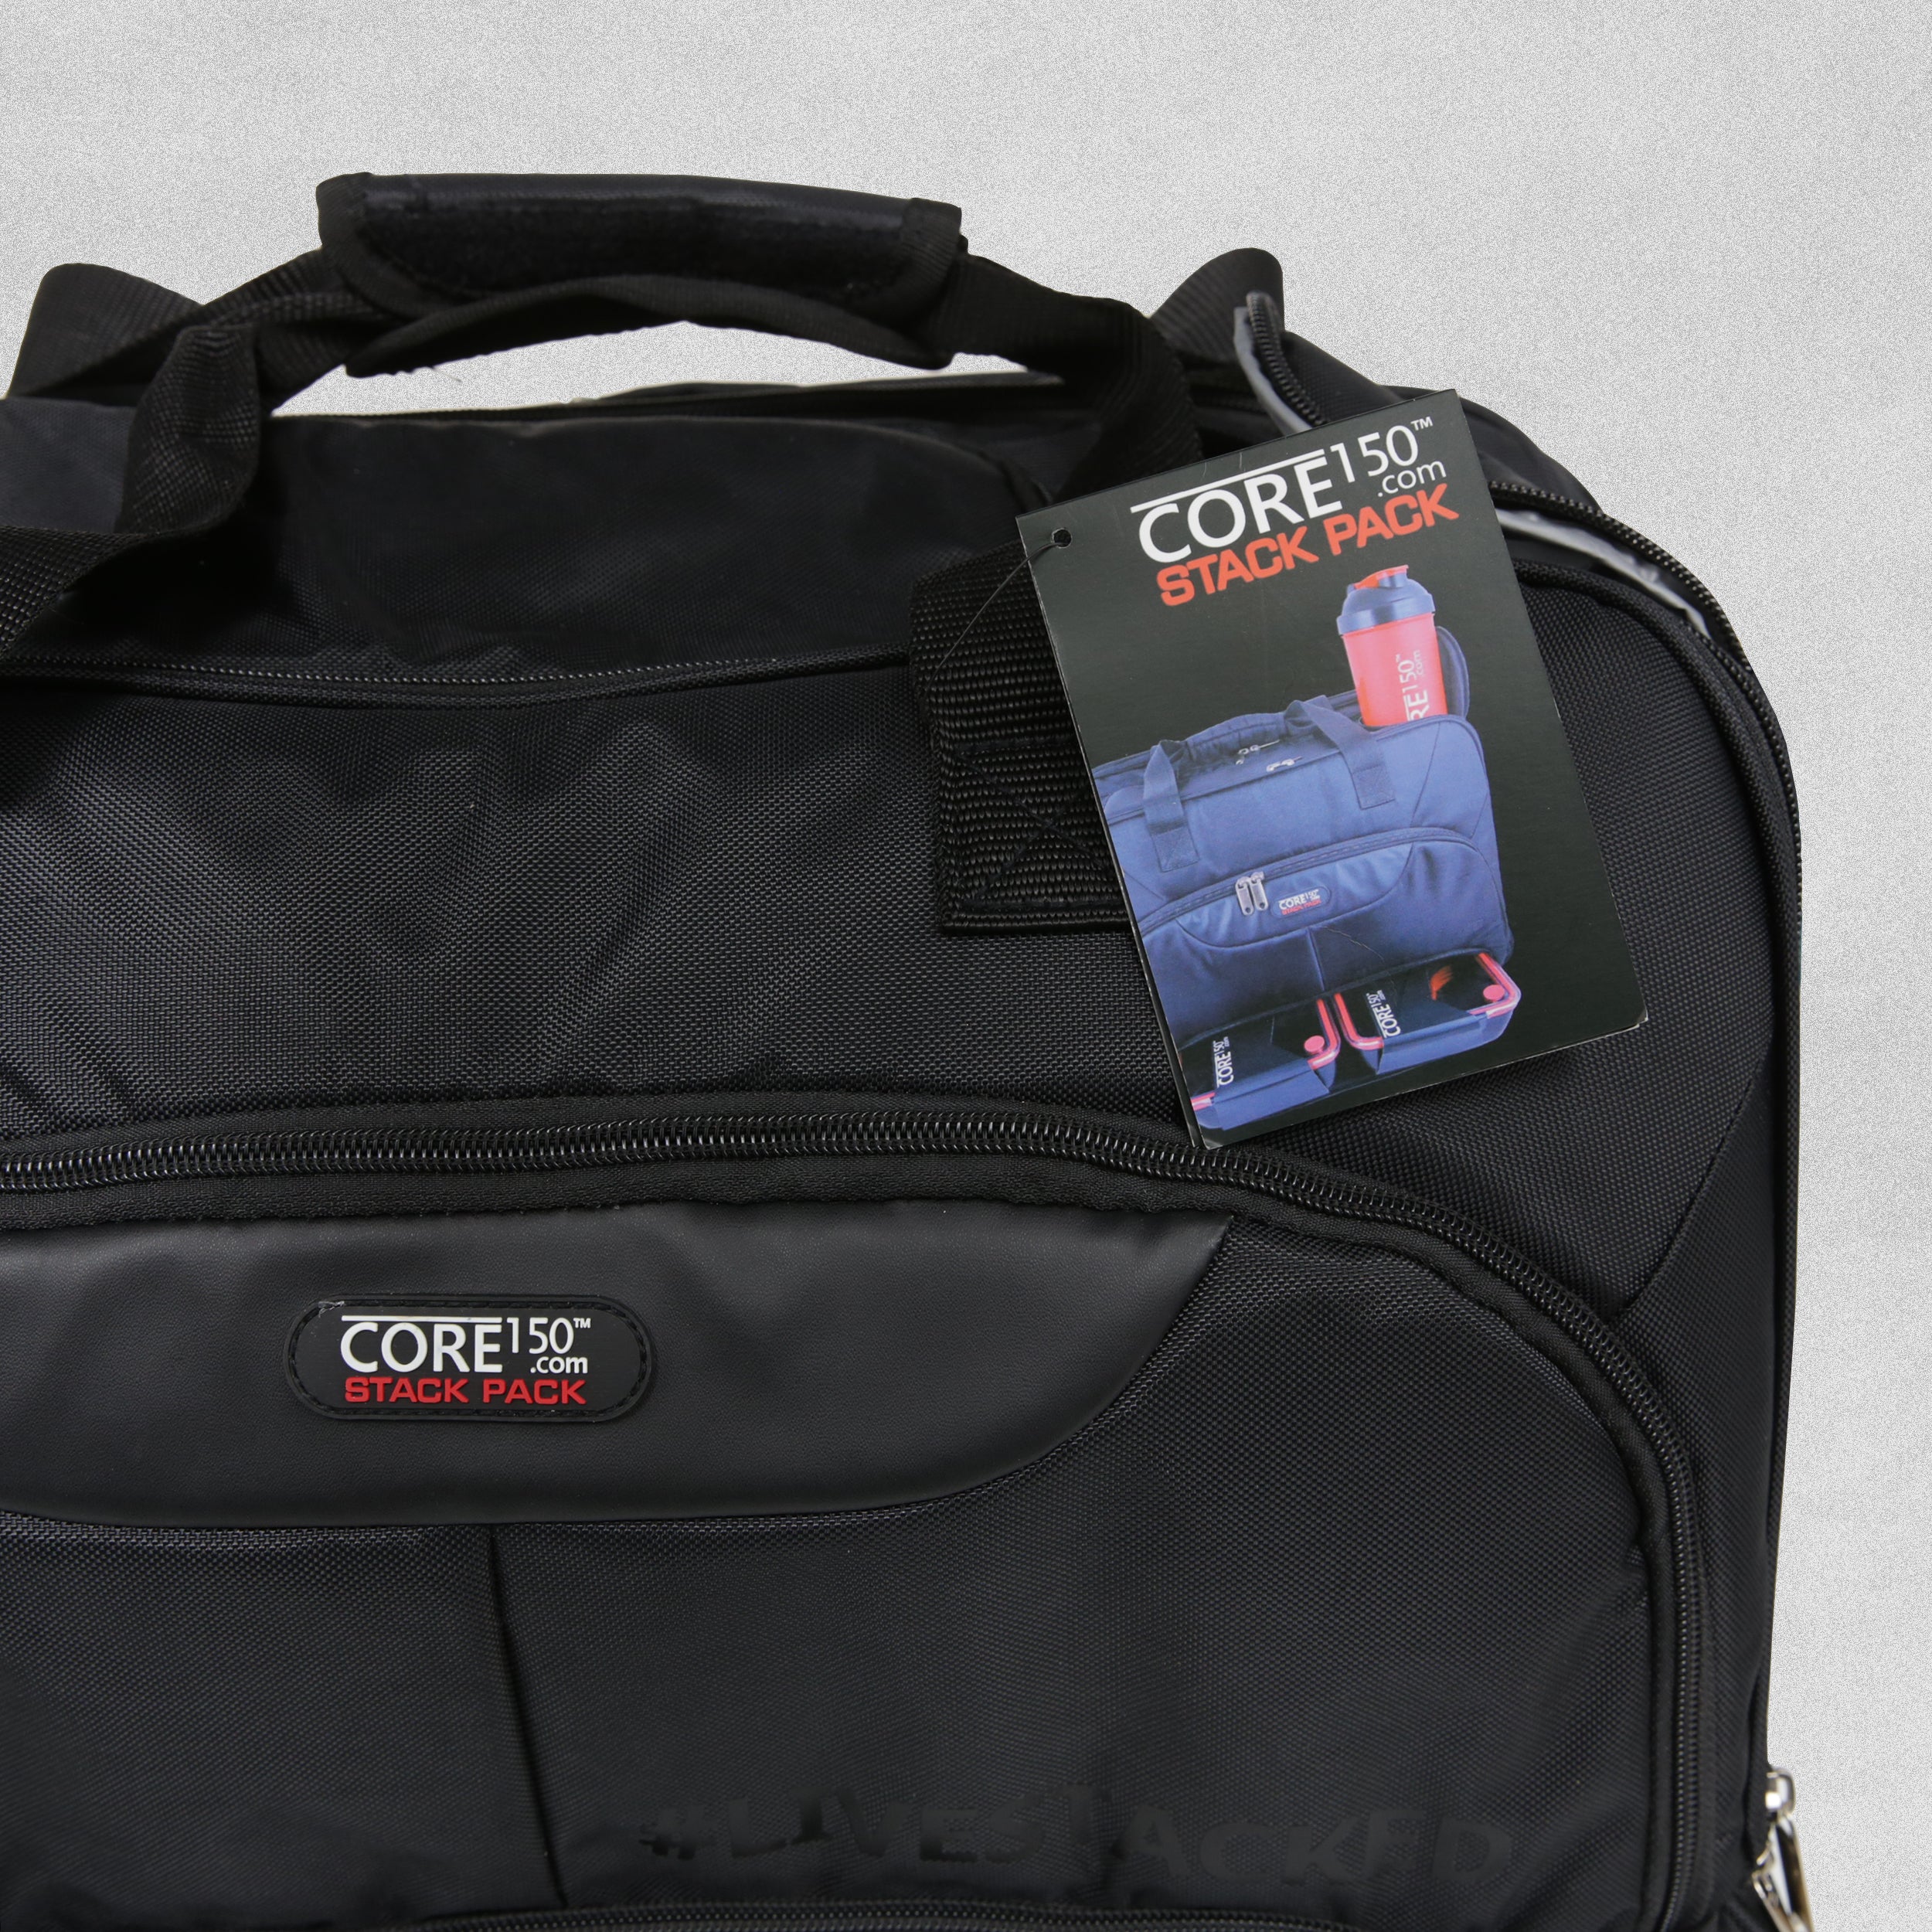 Core 150™ Stack Pack™ Gym Bag with Meal Prep Containers